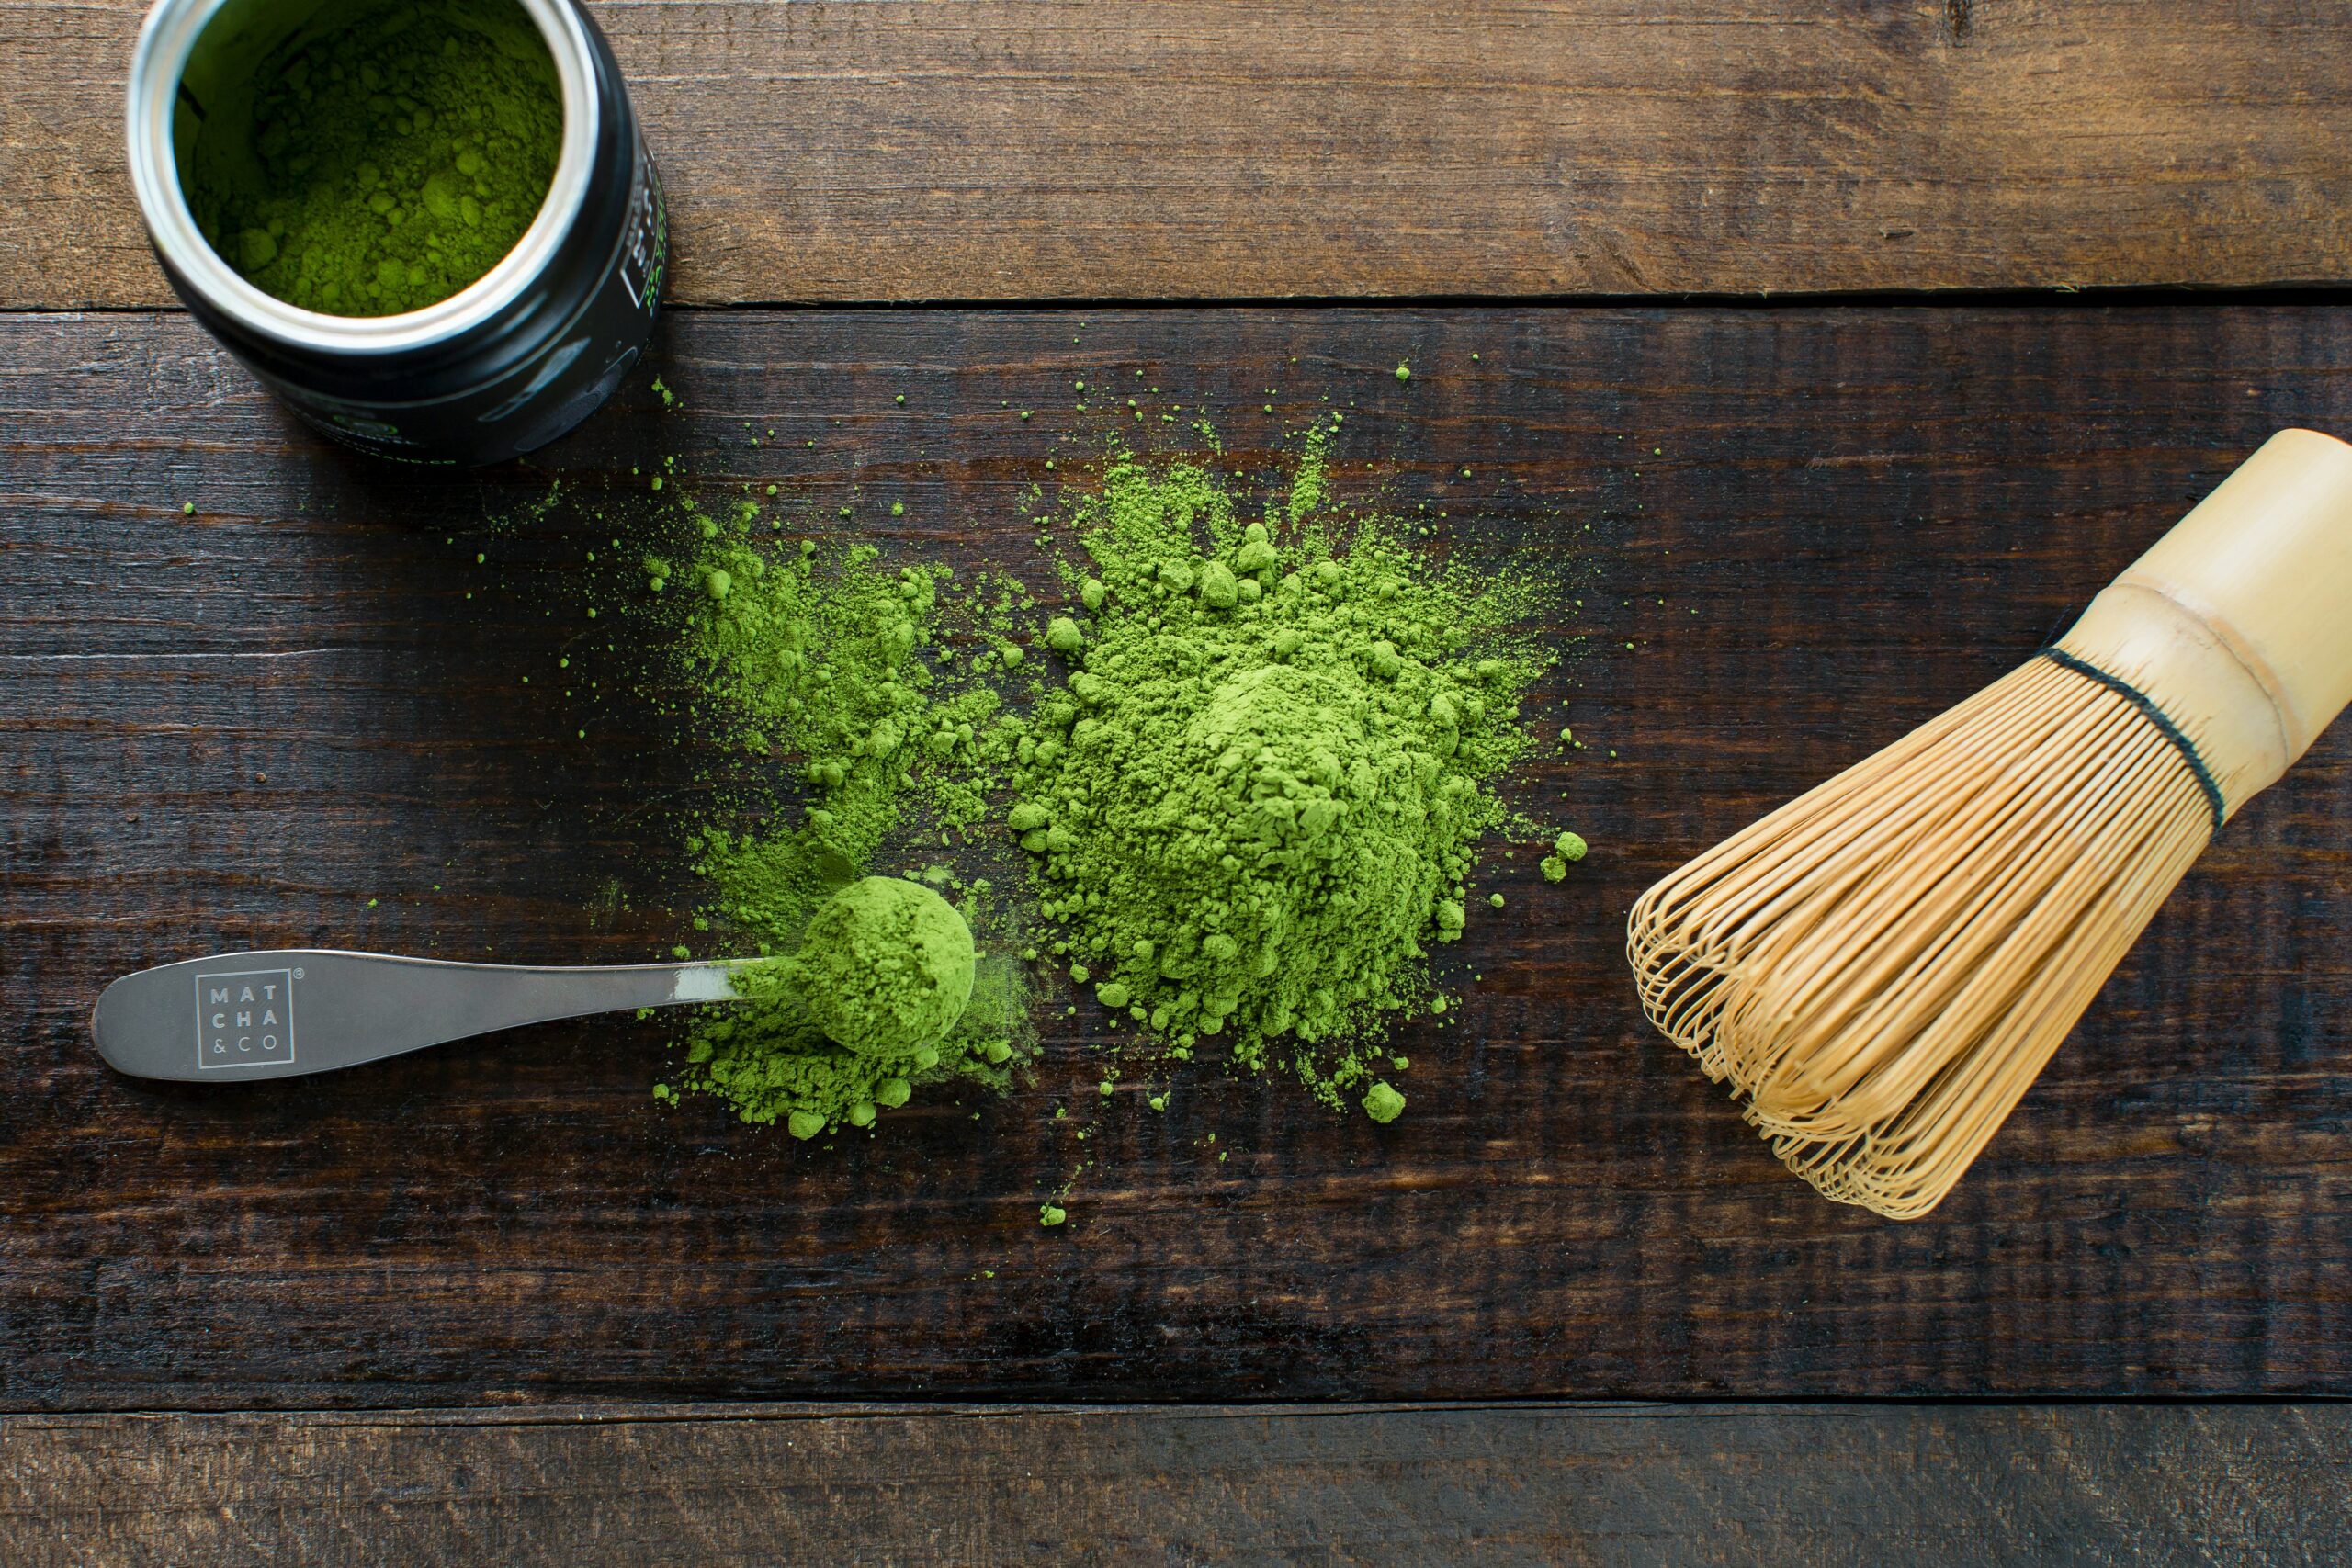 A spoonful of matcha powder on a wooden board alongside a matcha whisk and cup of green tea.